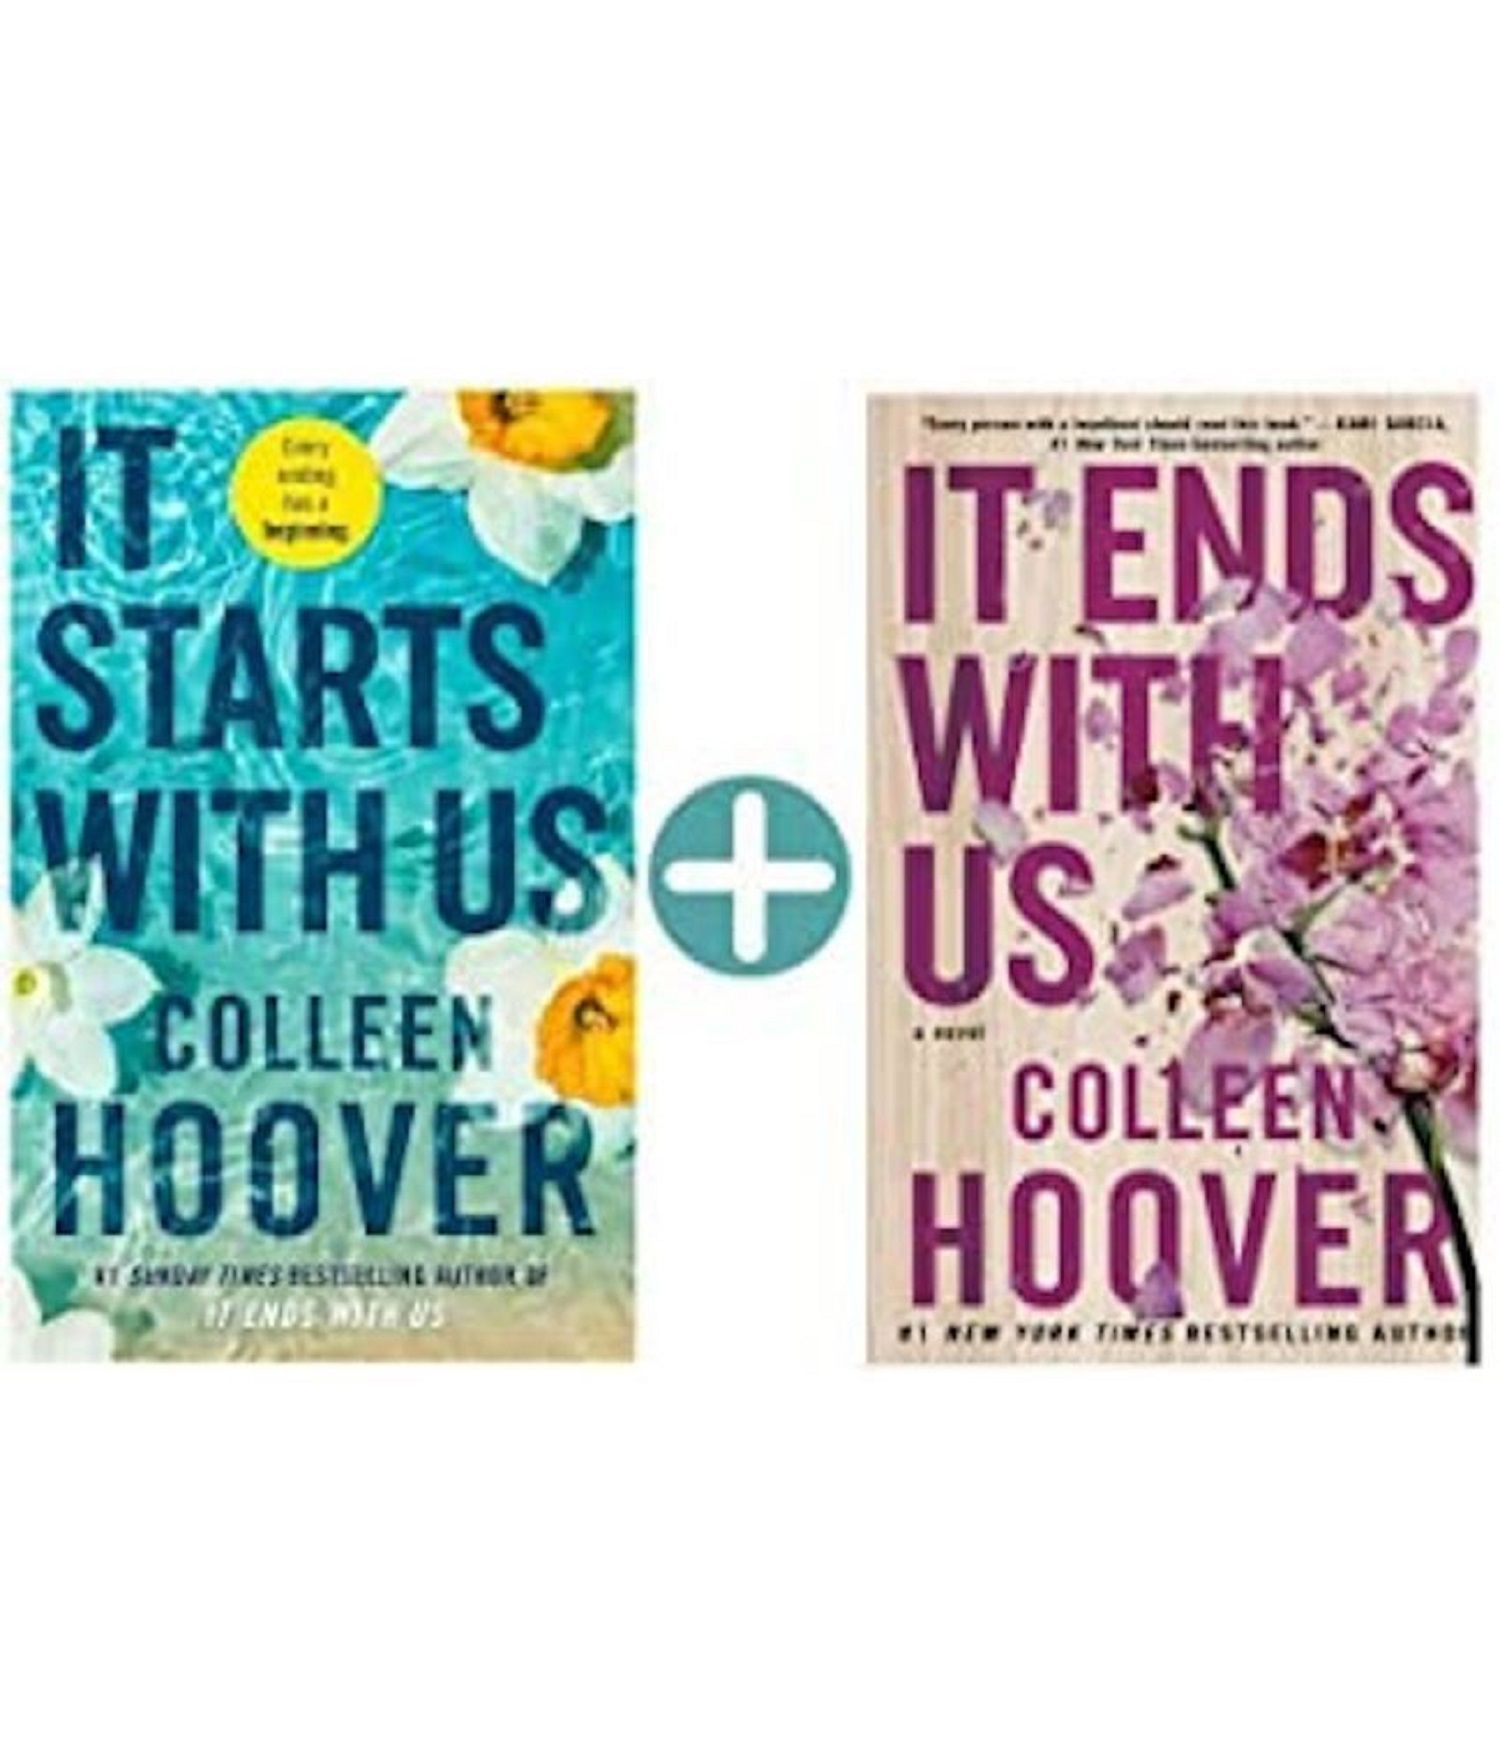     			Combo Of It Ends With Us & It starts With Us ( COLLEEN HOOVER)